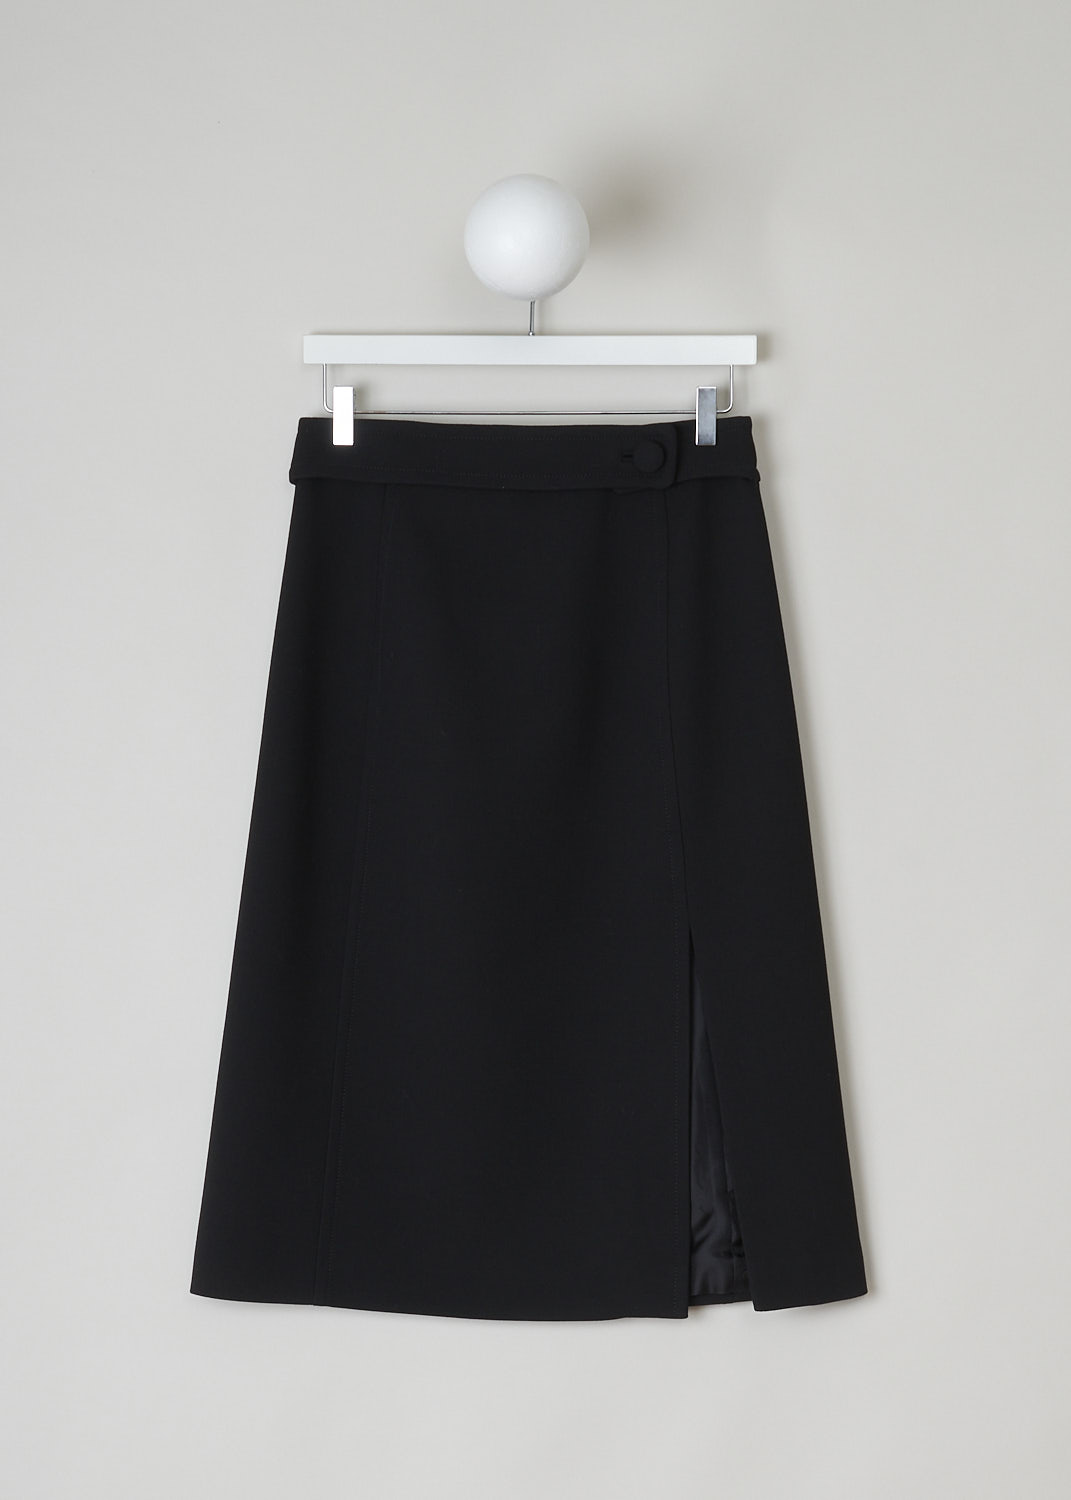 PRADA, BLACK A-LINE MIDI SKIRT, P113H_GUL_F0002_NATTE_GONNA_NERO, Black, Back, This black wool midi skirt has an A-line silhouette. In the back, on the broad waistband, the skirt has an incorporated belted detail with a big round fabric button. Also in the back, the skirt has a side slit and a concealed zipper that functions as the closure option. The skirt is fully lined.

